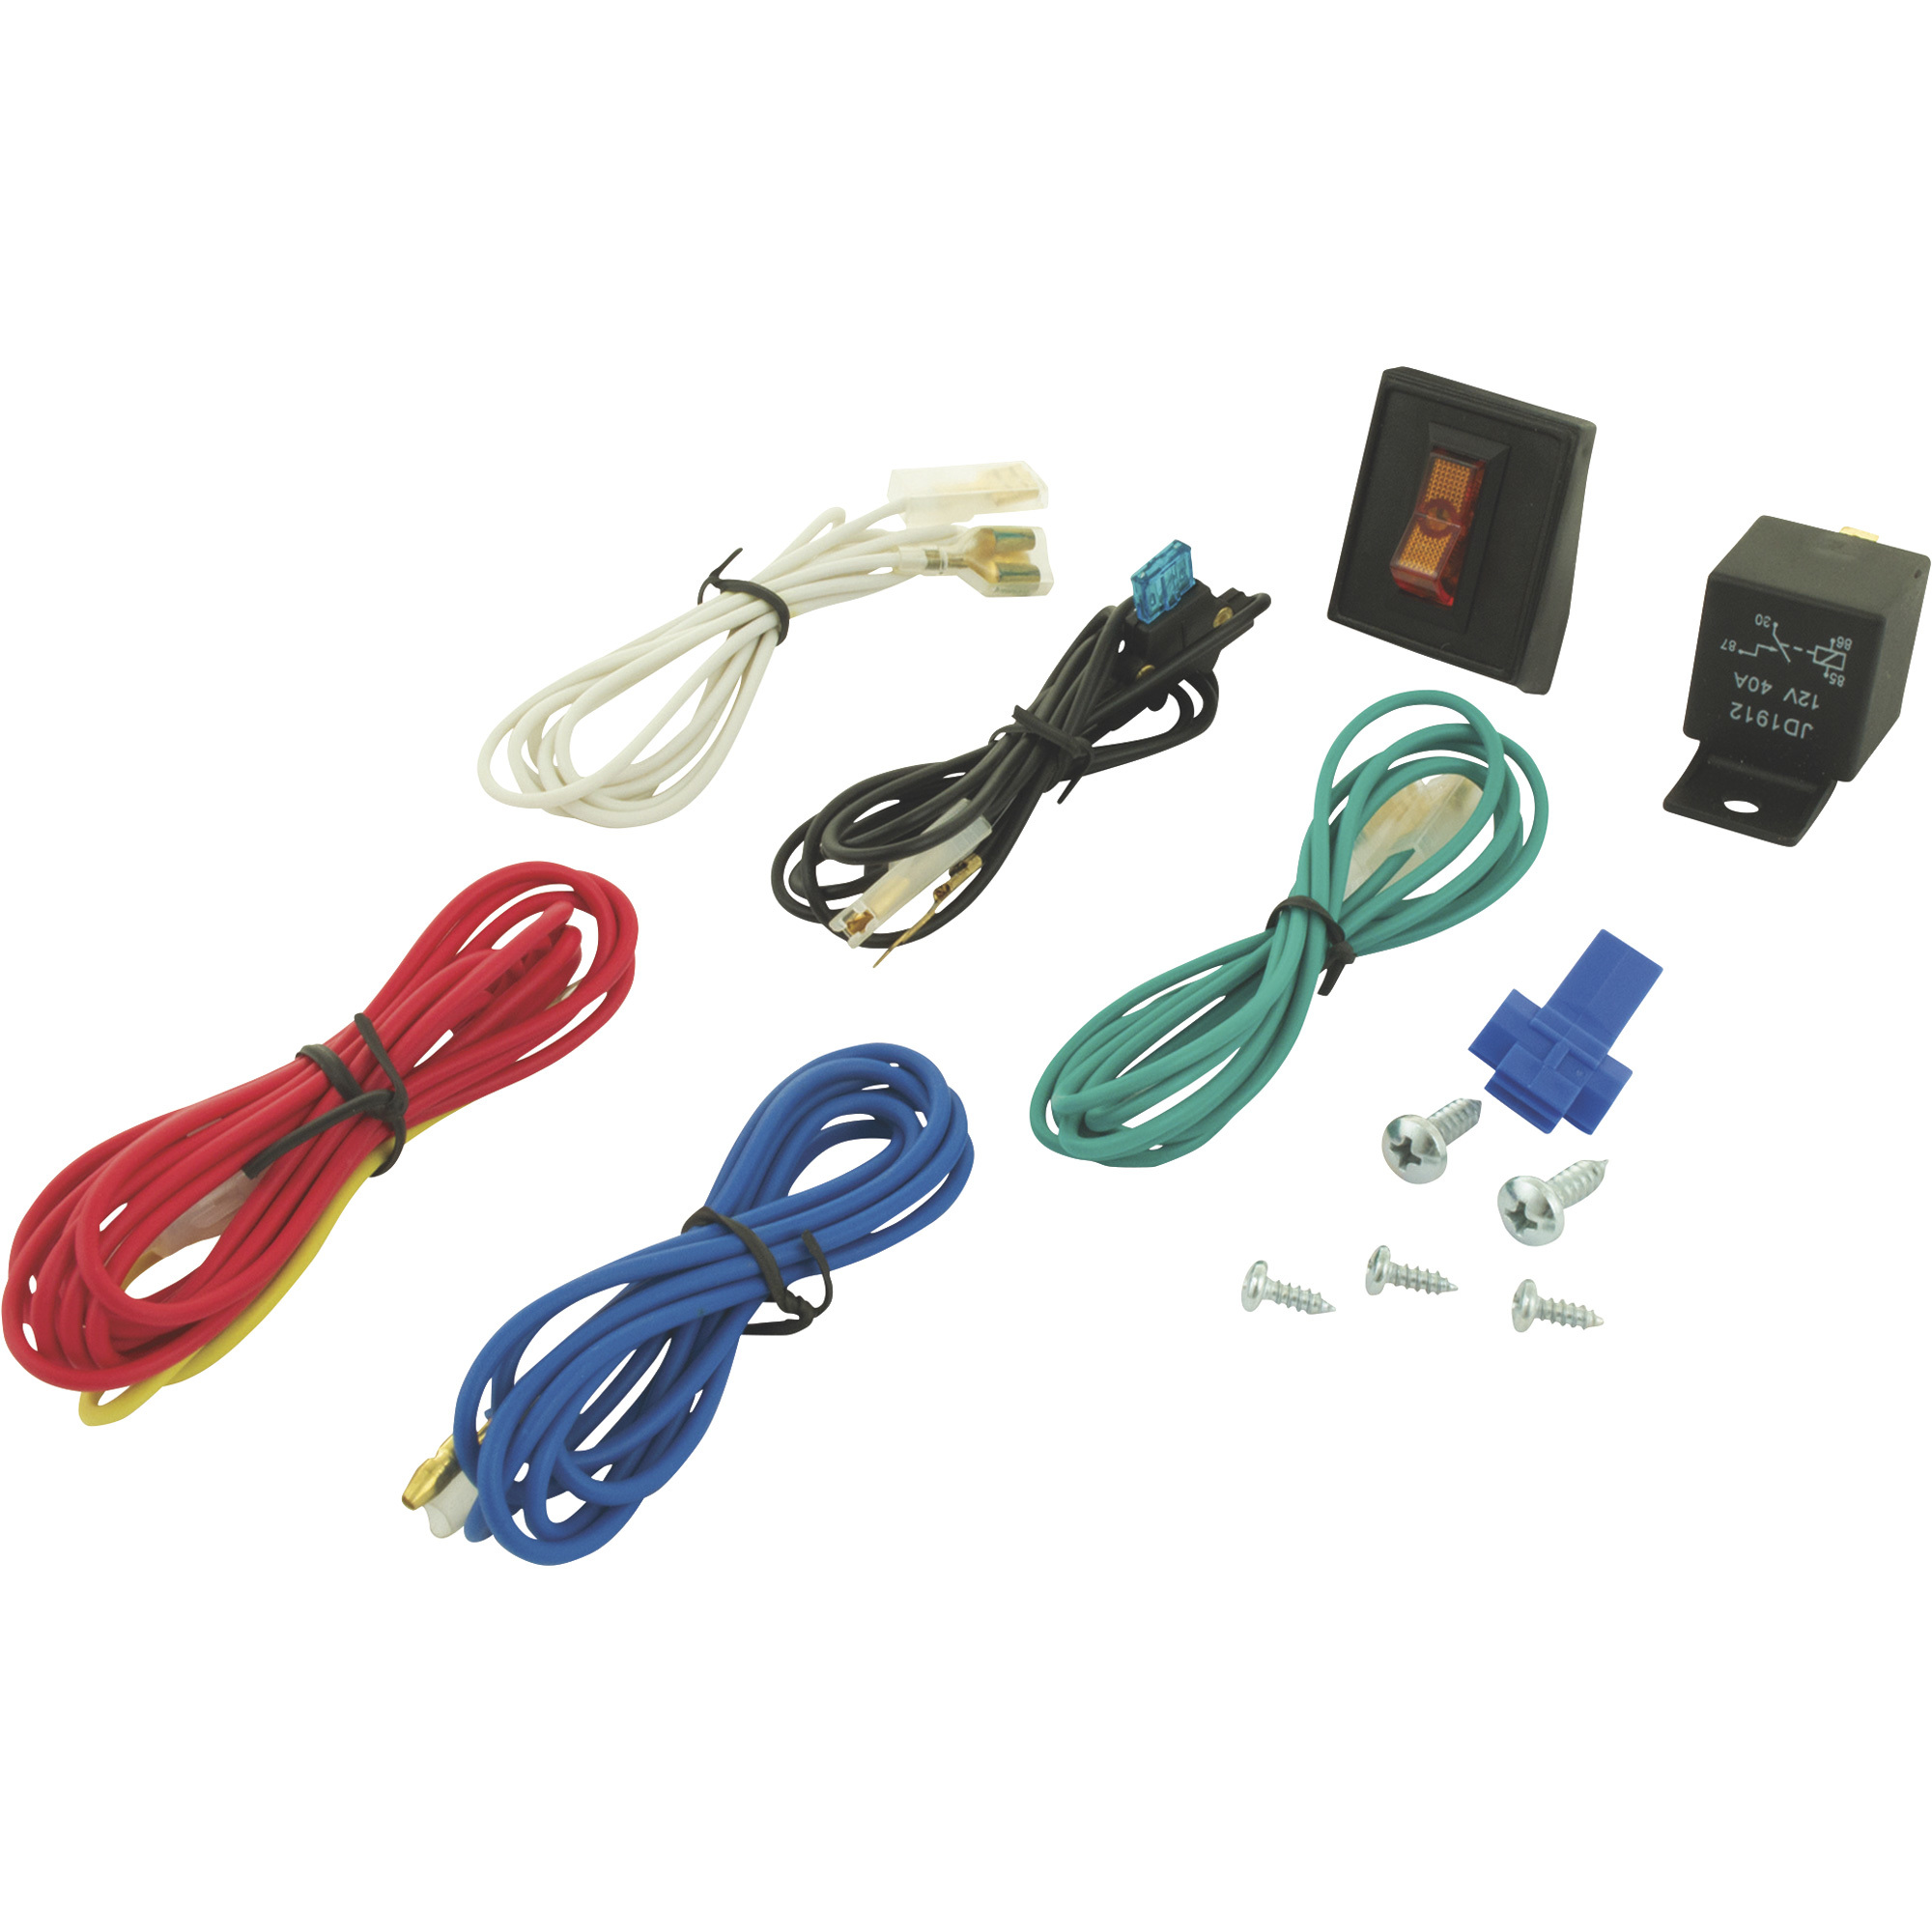 Hopkins Towing Solutions Complete Trailer Light Wiring Kit for Auxiliary Lighting â Model MM510